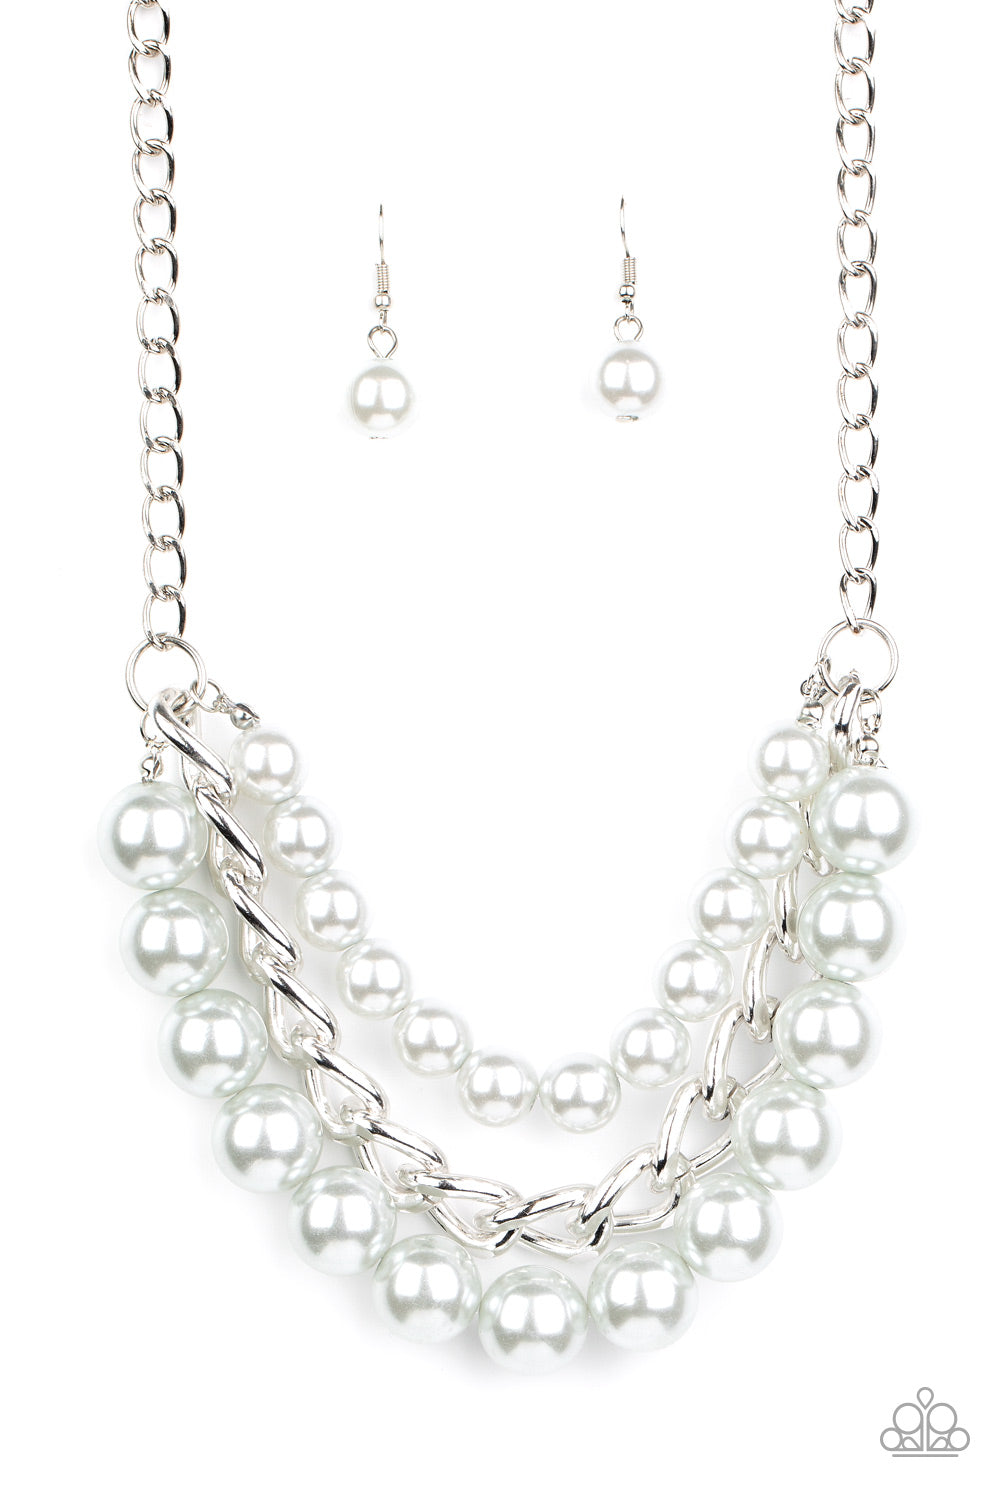 Two strands of dramatic silver pearls flank one strand of oversized silver chain, creating statement-making layers below the collar.  Paparazzi Accessories are nickel-free and lead free.